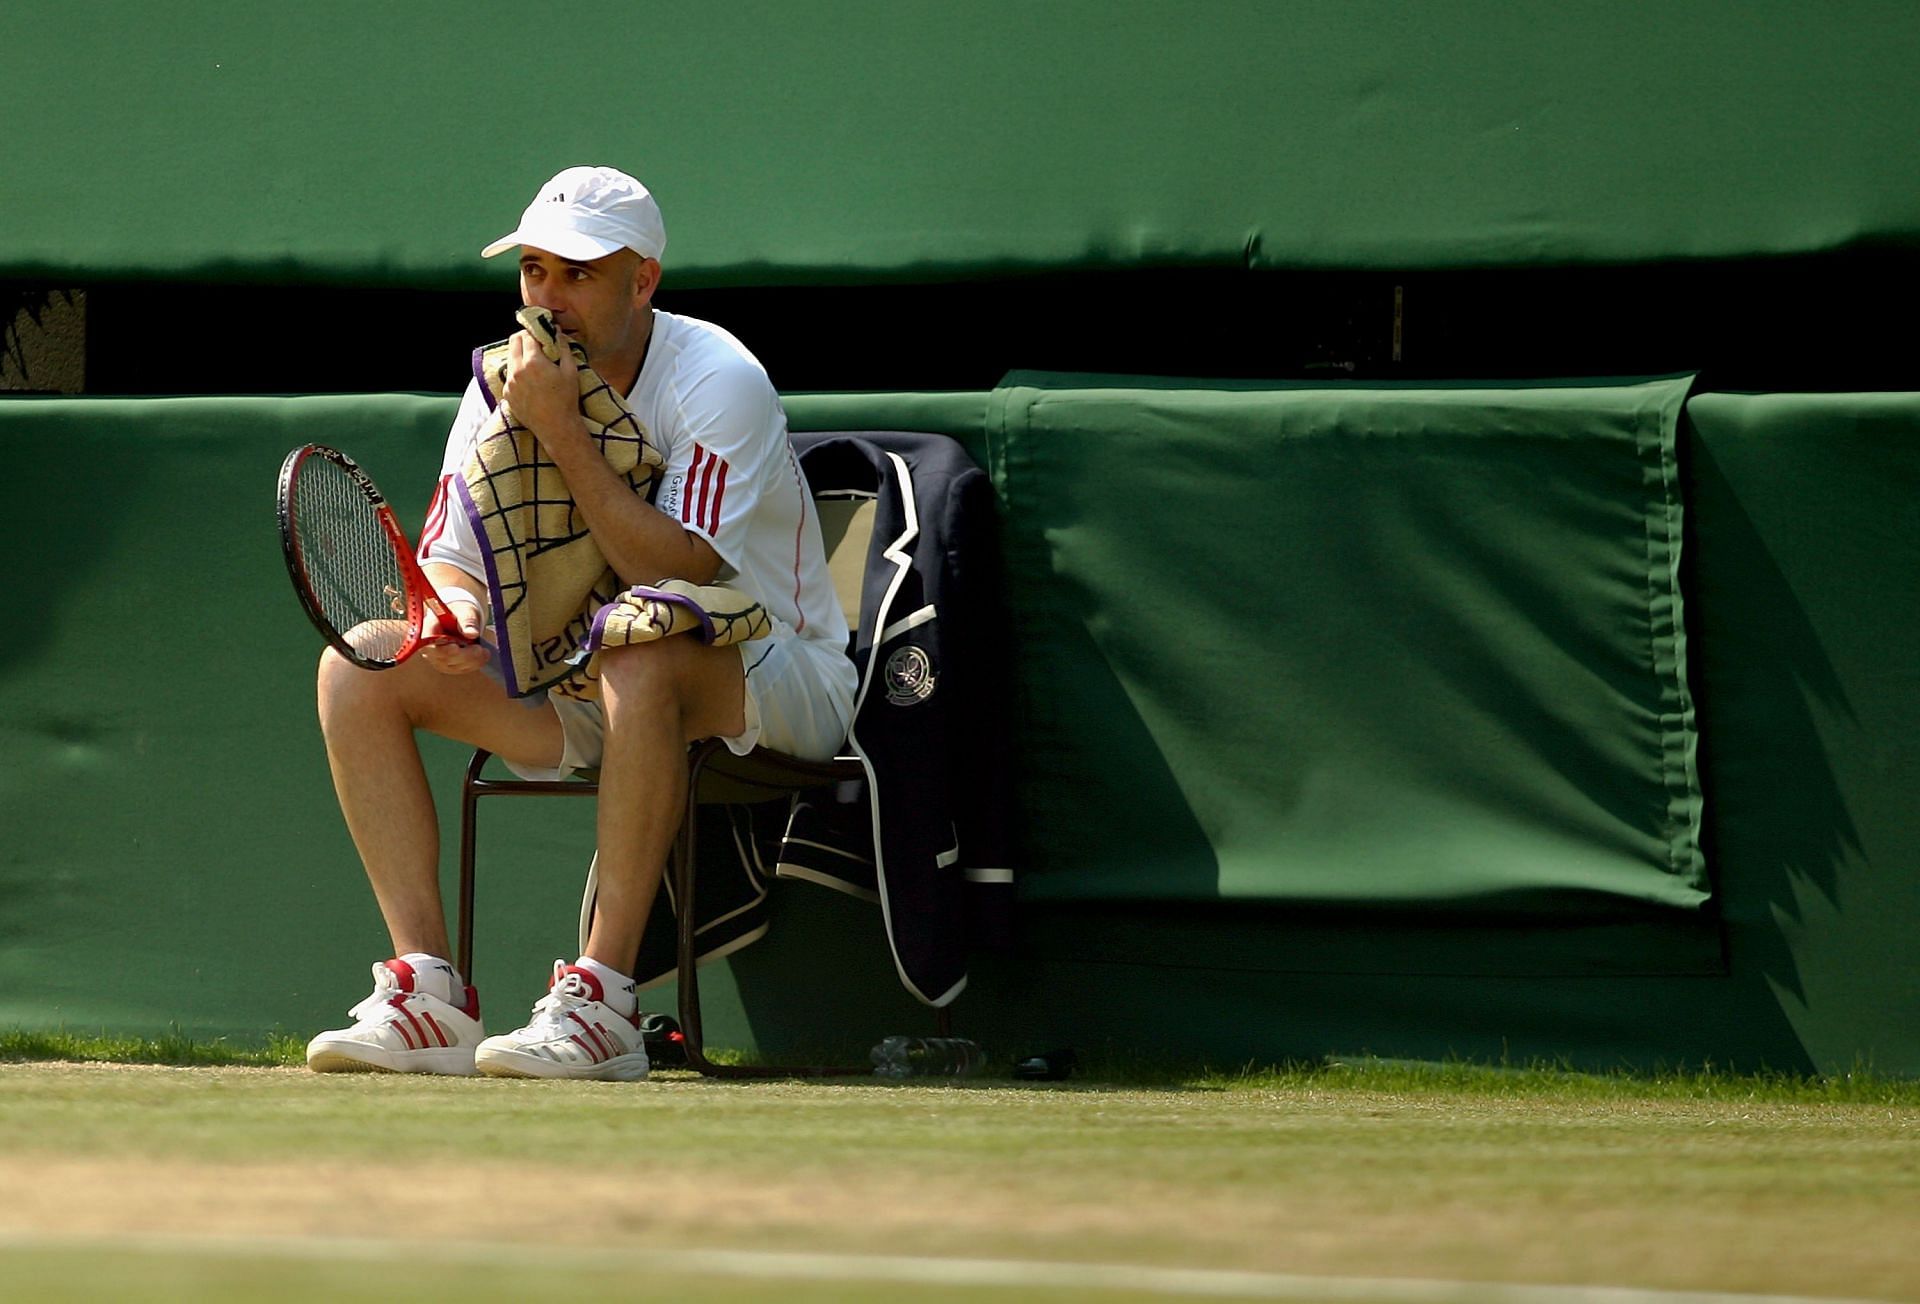 Andre Agassi at the 2006 Wimbledon Championships.